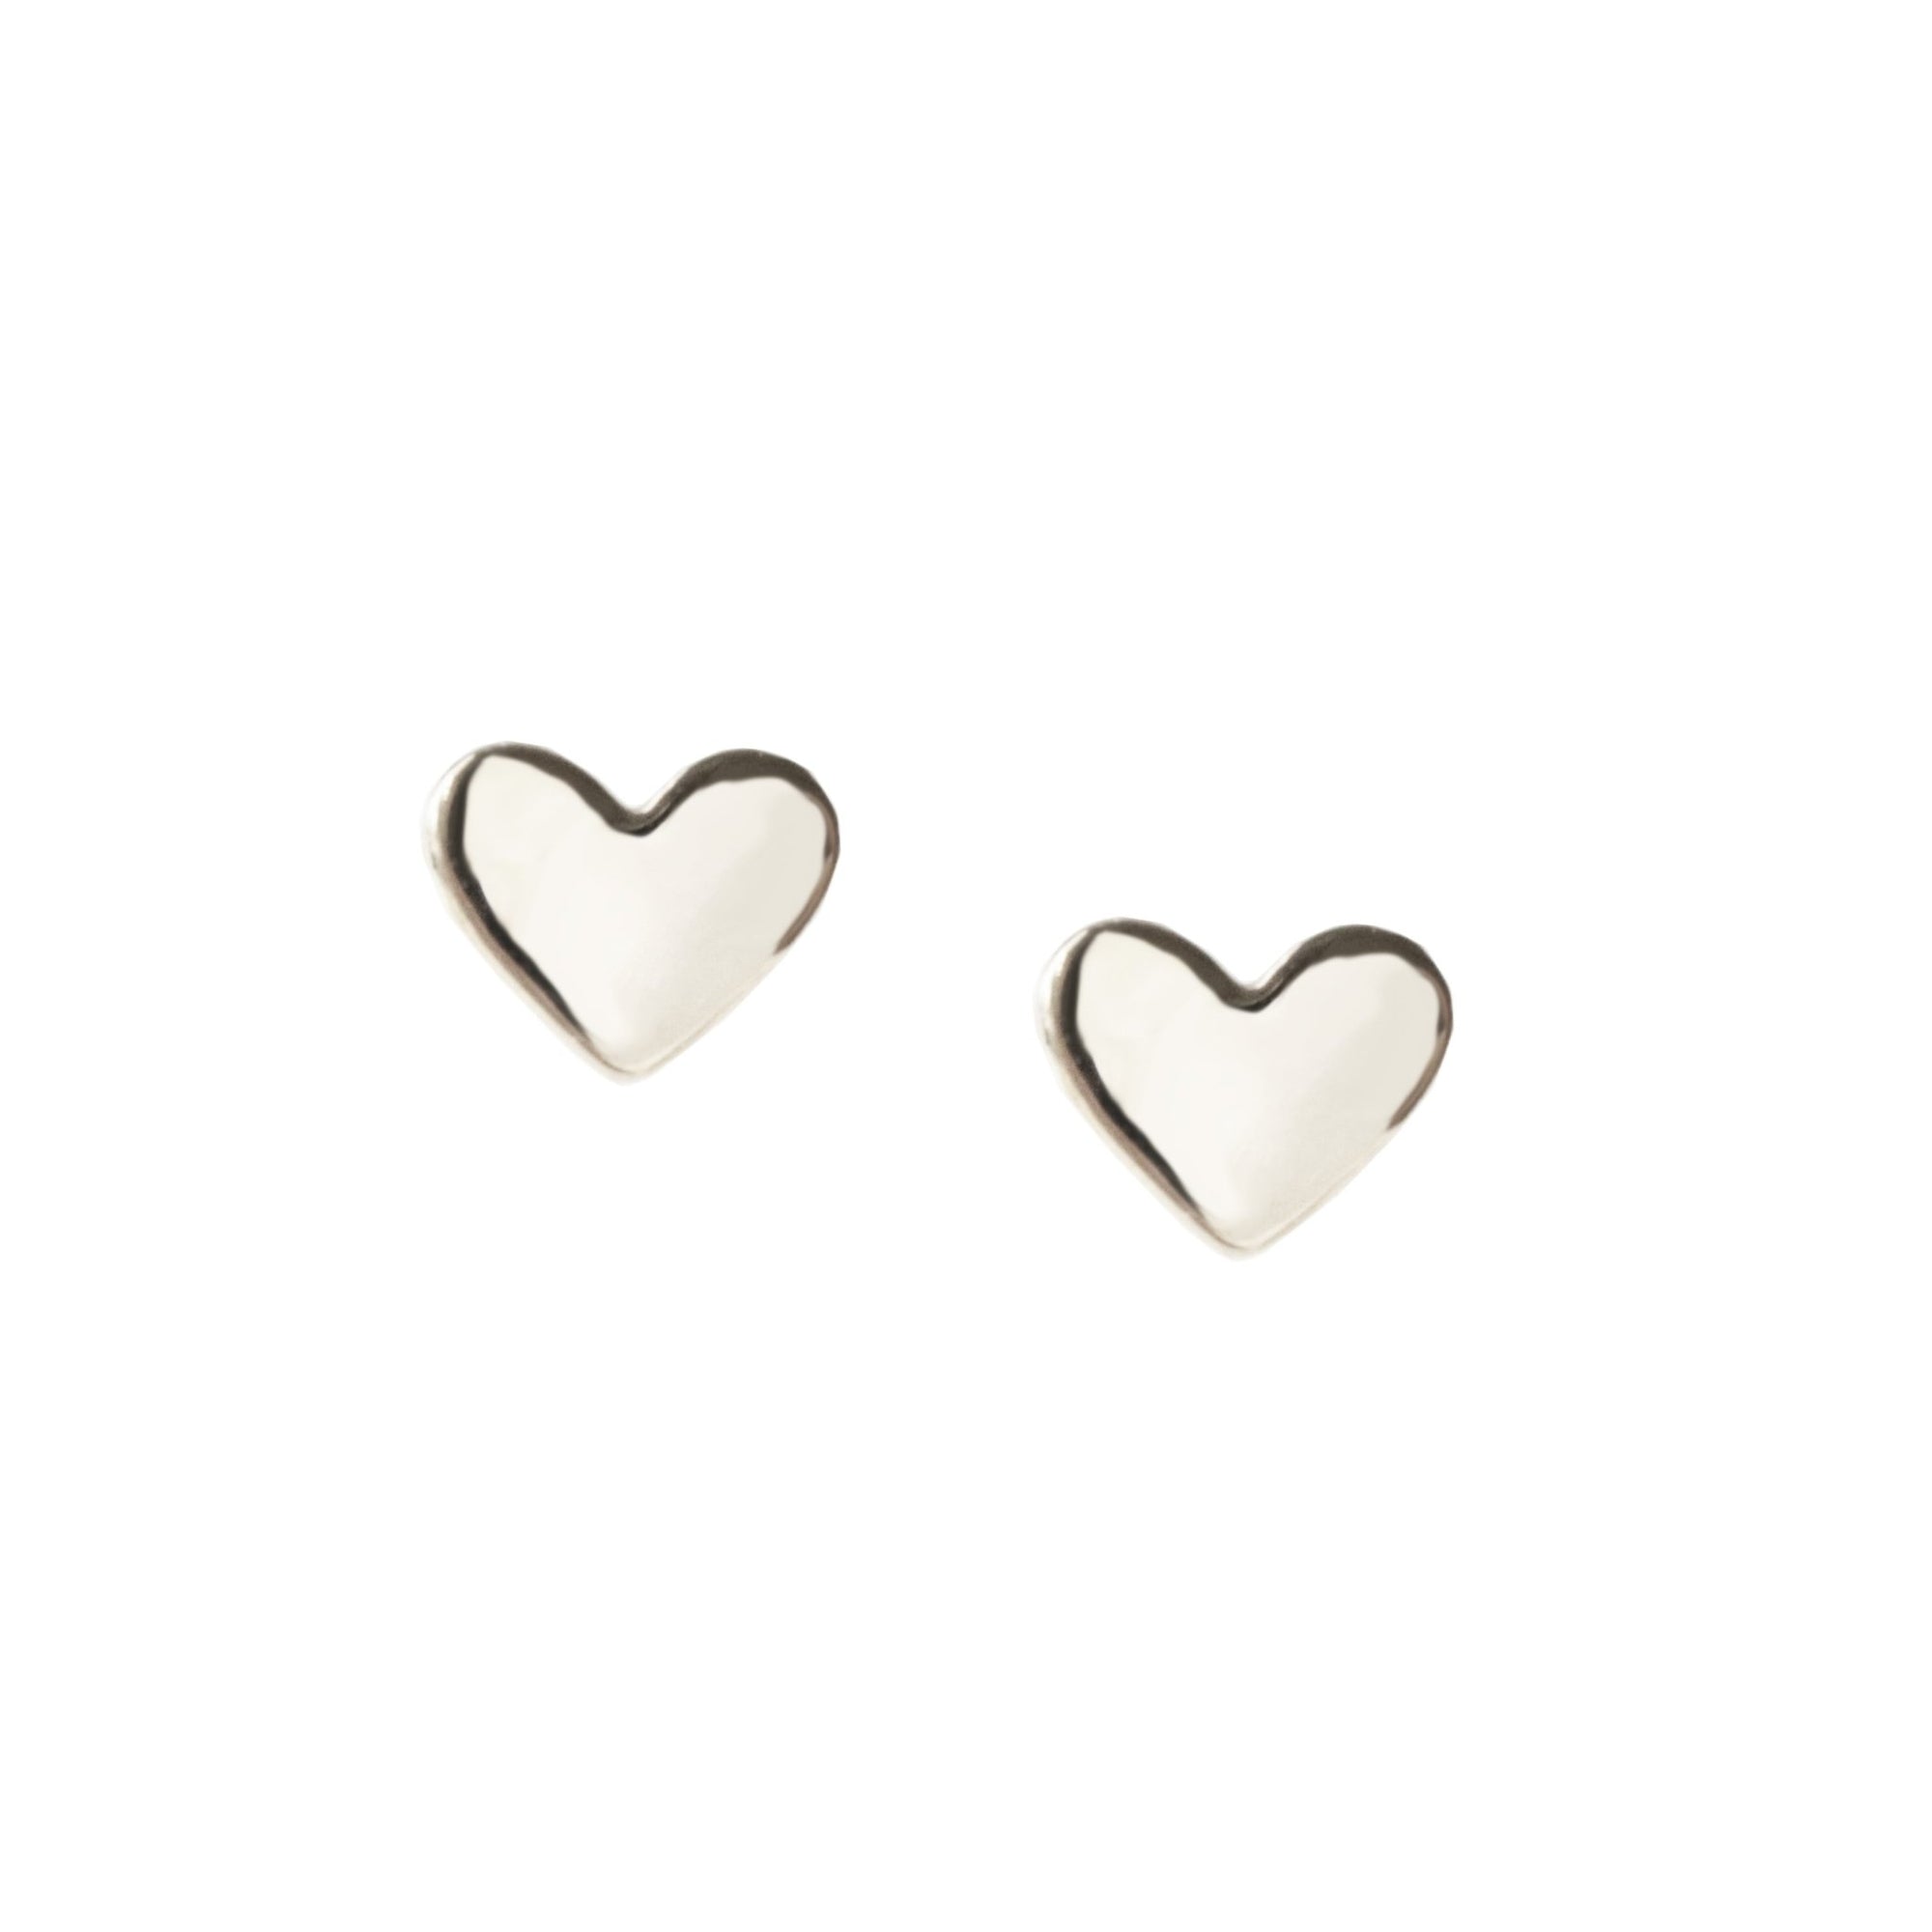 TINY POISE HEART STUDS - SILVER - SO PRETTY CARA COTTER